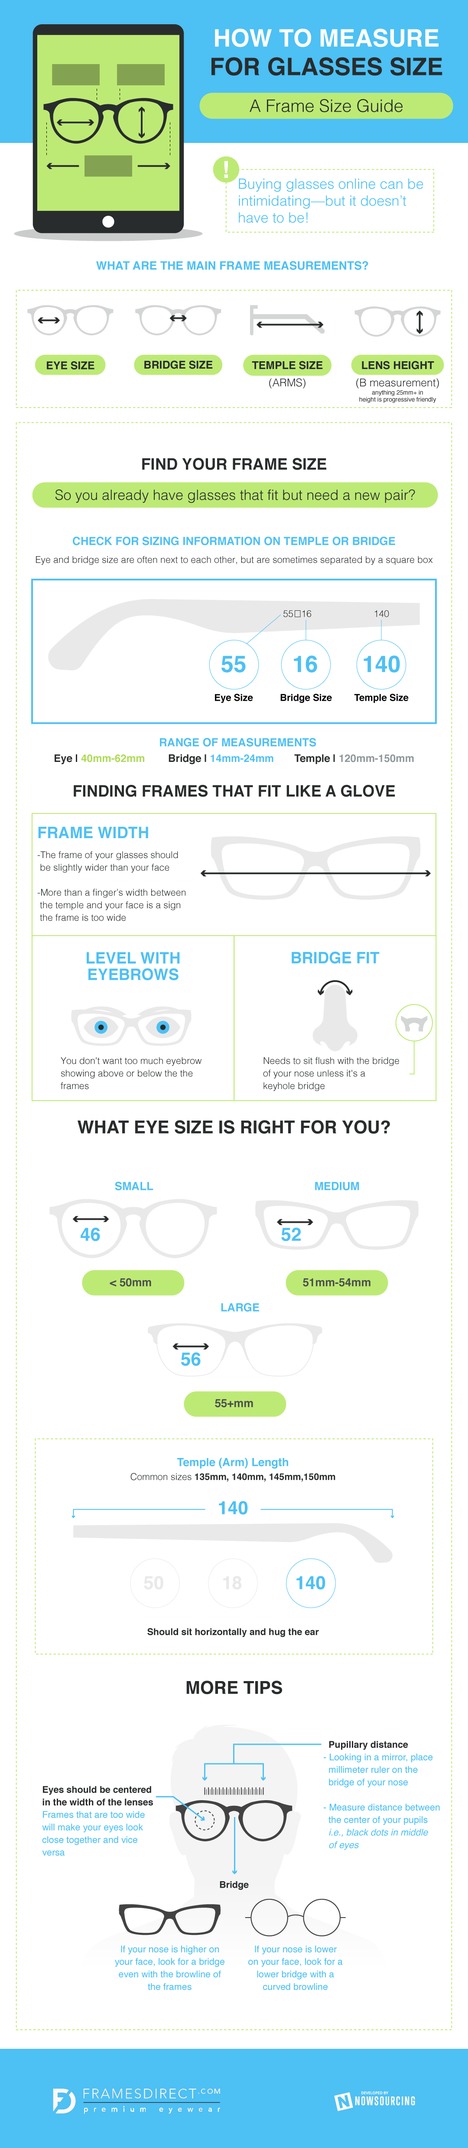 How to Measure for Glasses Size